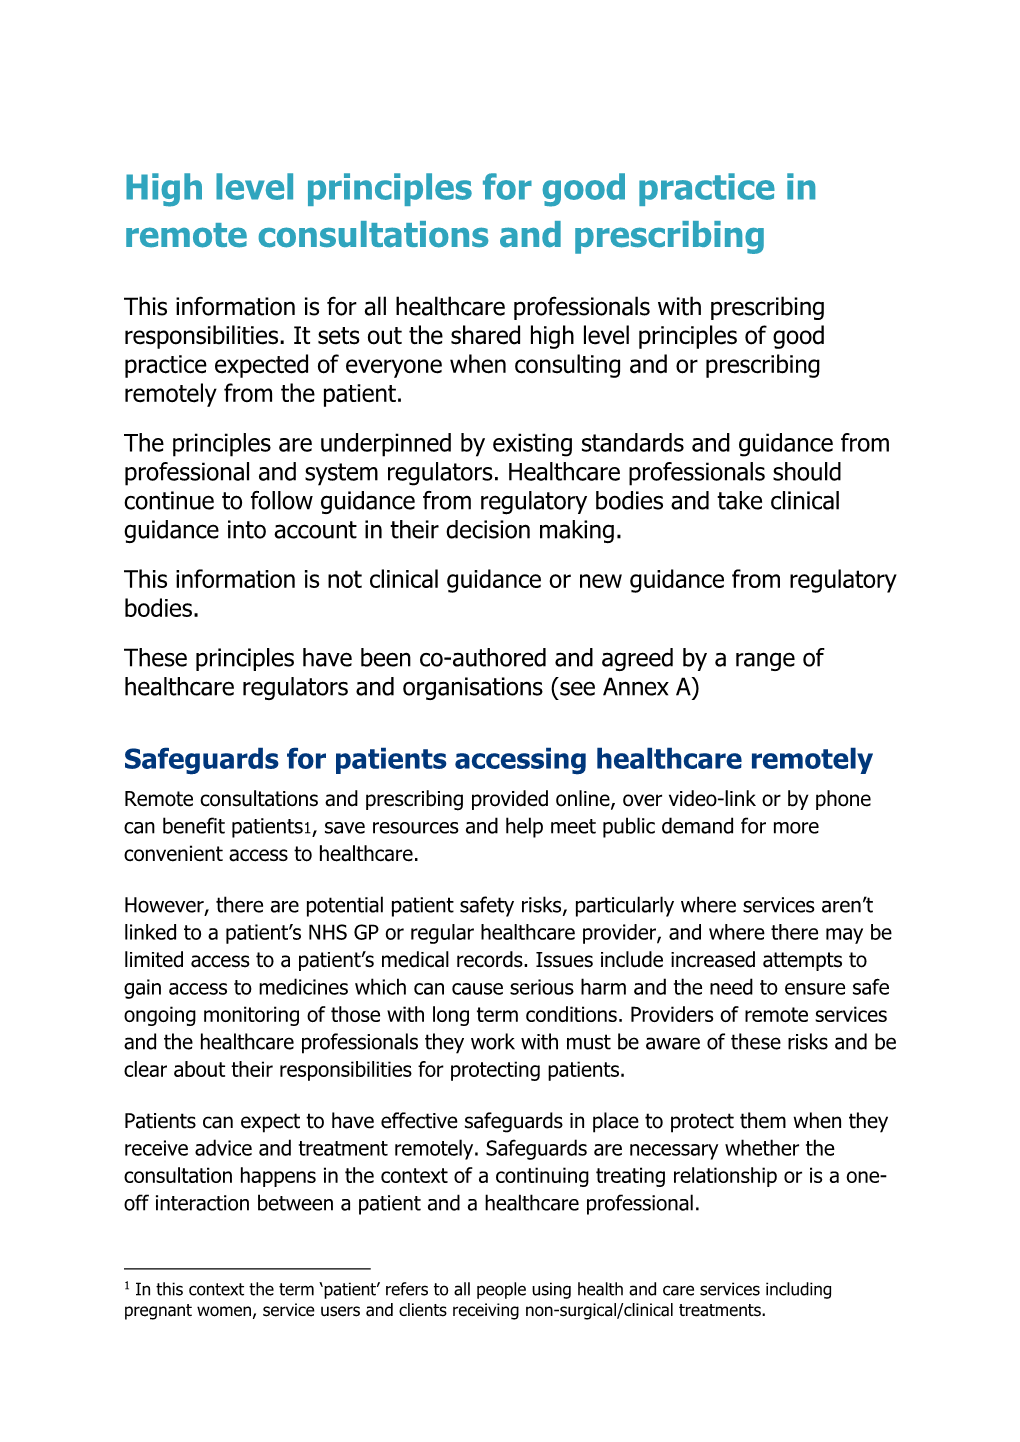 High Level Principles for Good Practice in Remote Consultations and Prescribing